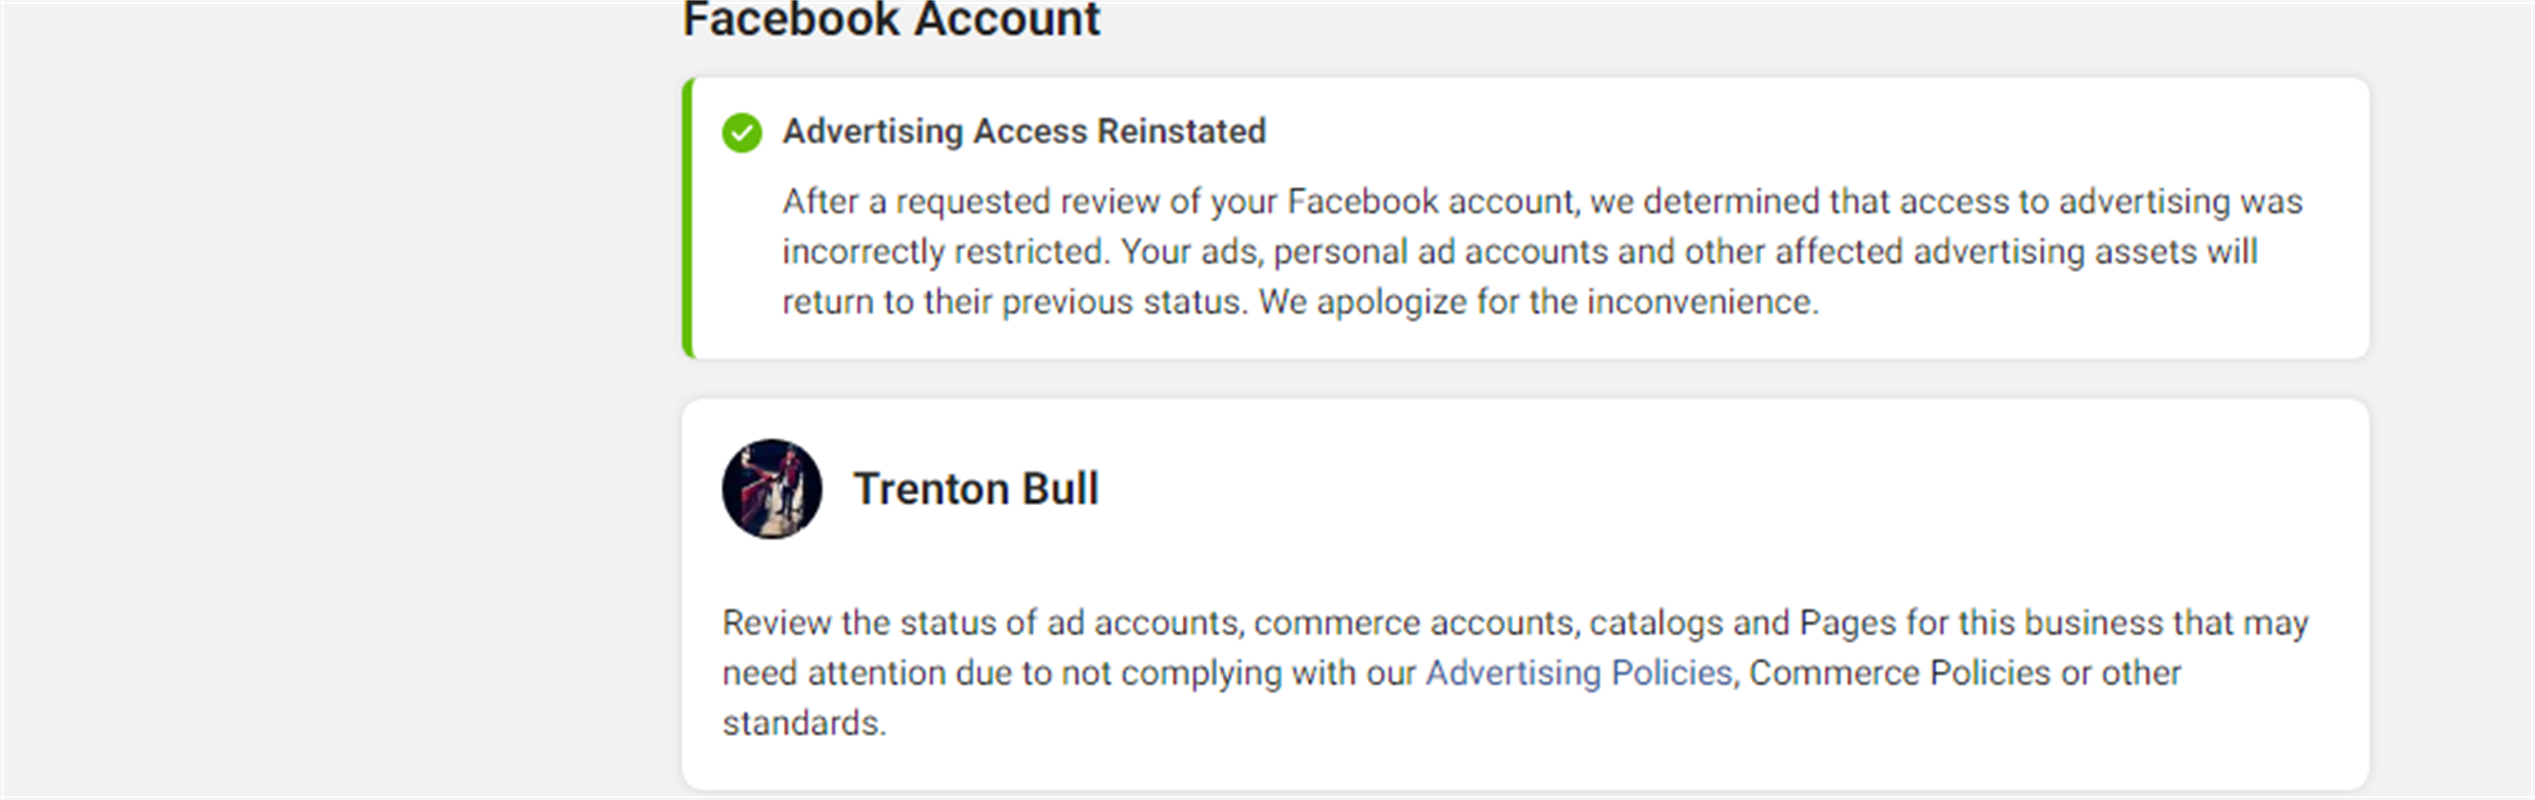 Indonesia Facebook Ads Account / Already resisted link 902/ 2FA / Full mail / Live Ads